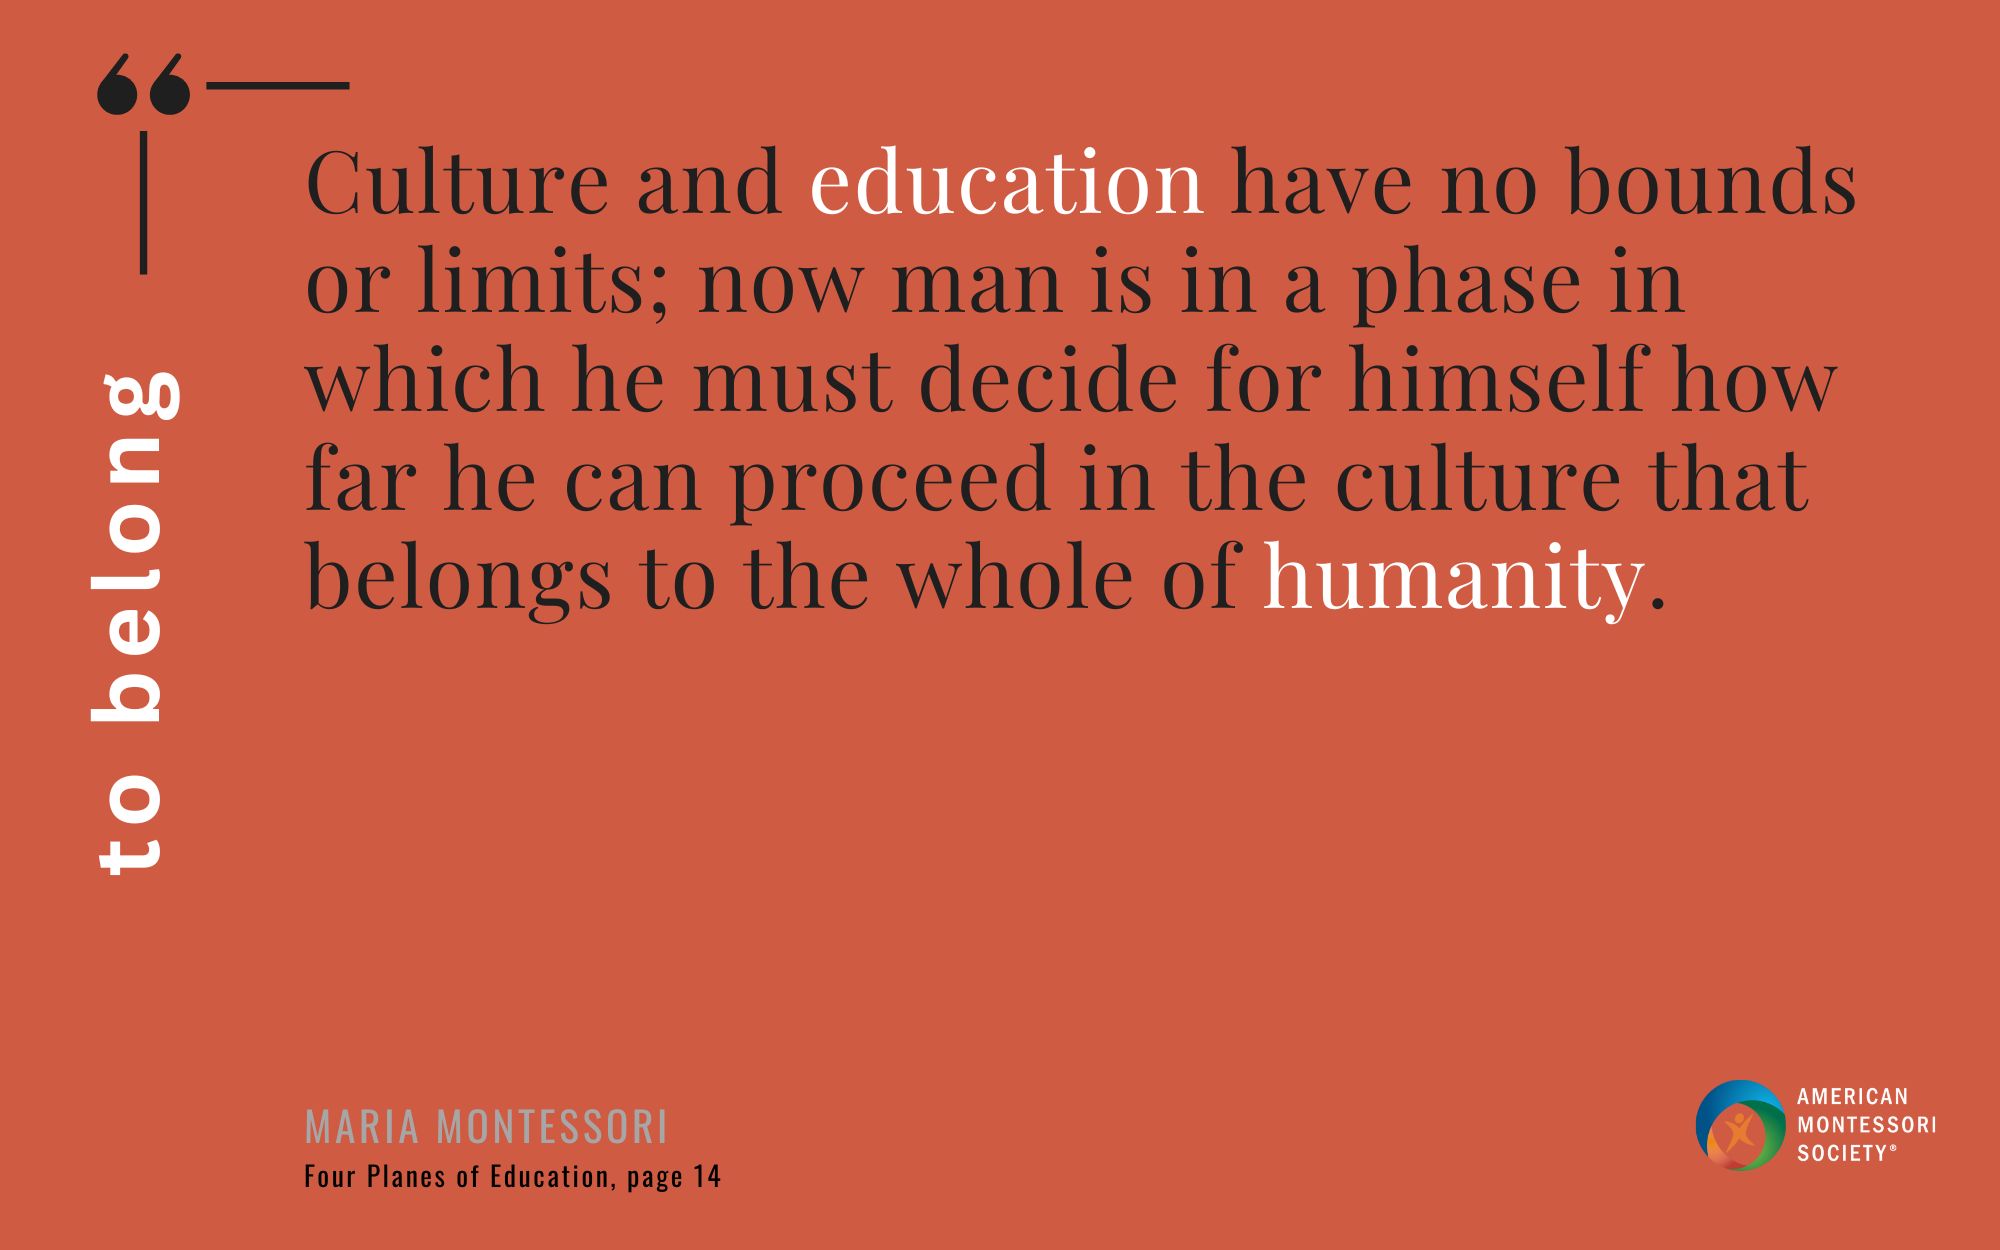 Culture and education have no bounds or limits; now man is in a phase in which he must decide for himself how far he can proceed in the culture that belongs to the whole of humanity.